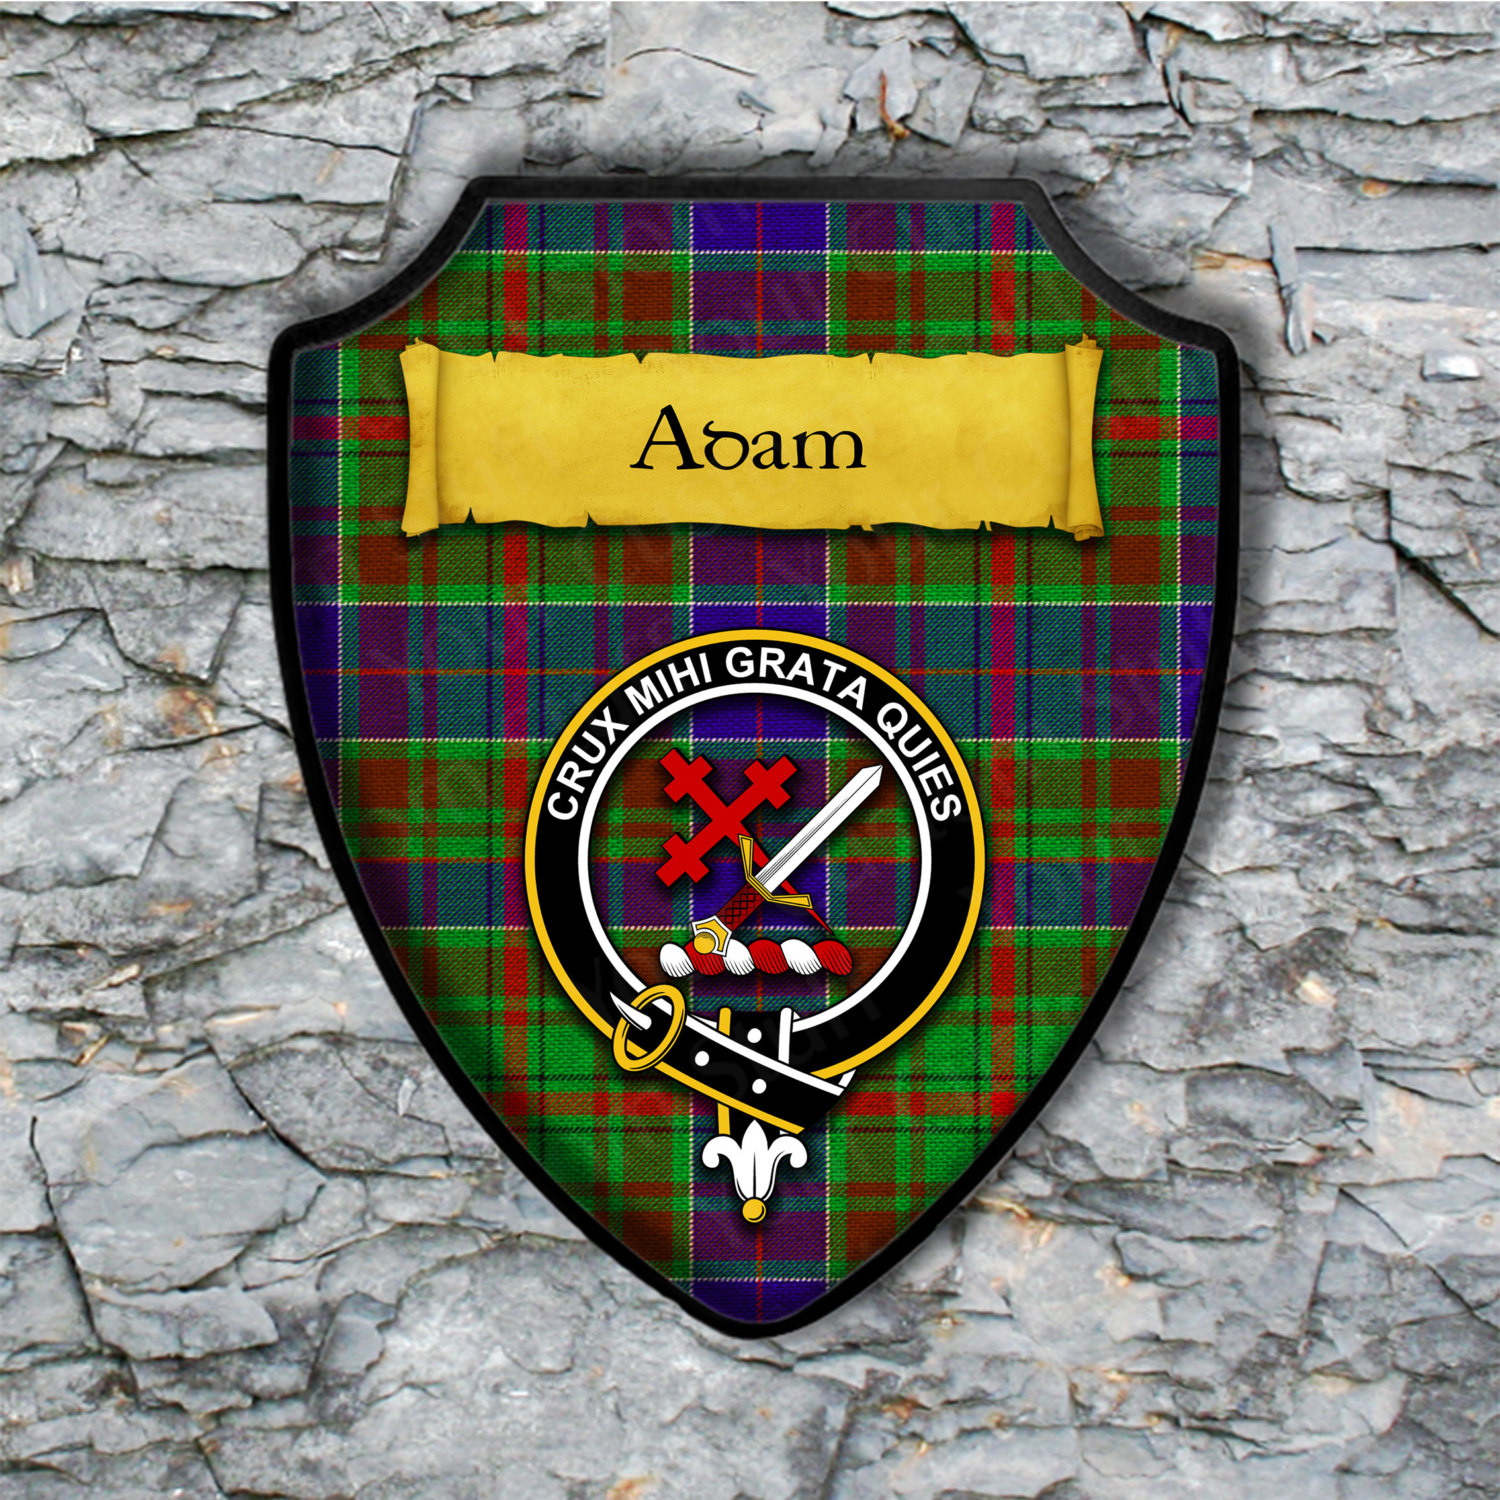 Adam Or Adams Shield Plaque With Scottish Clan Coat Of Arms Badge On Clan Plaid Tartan 2355